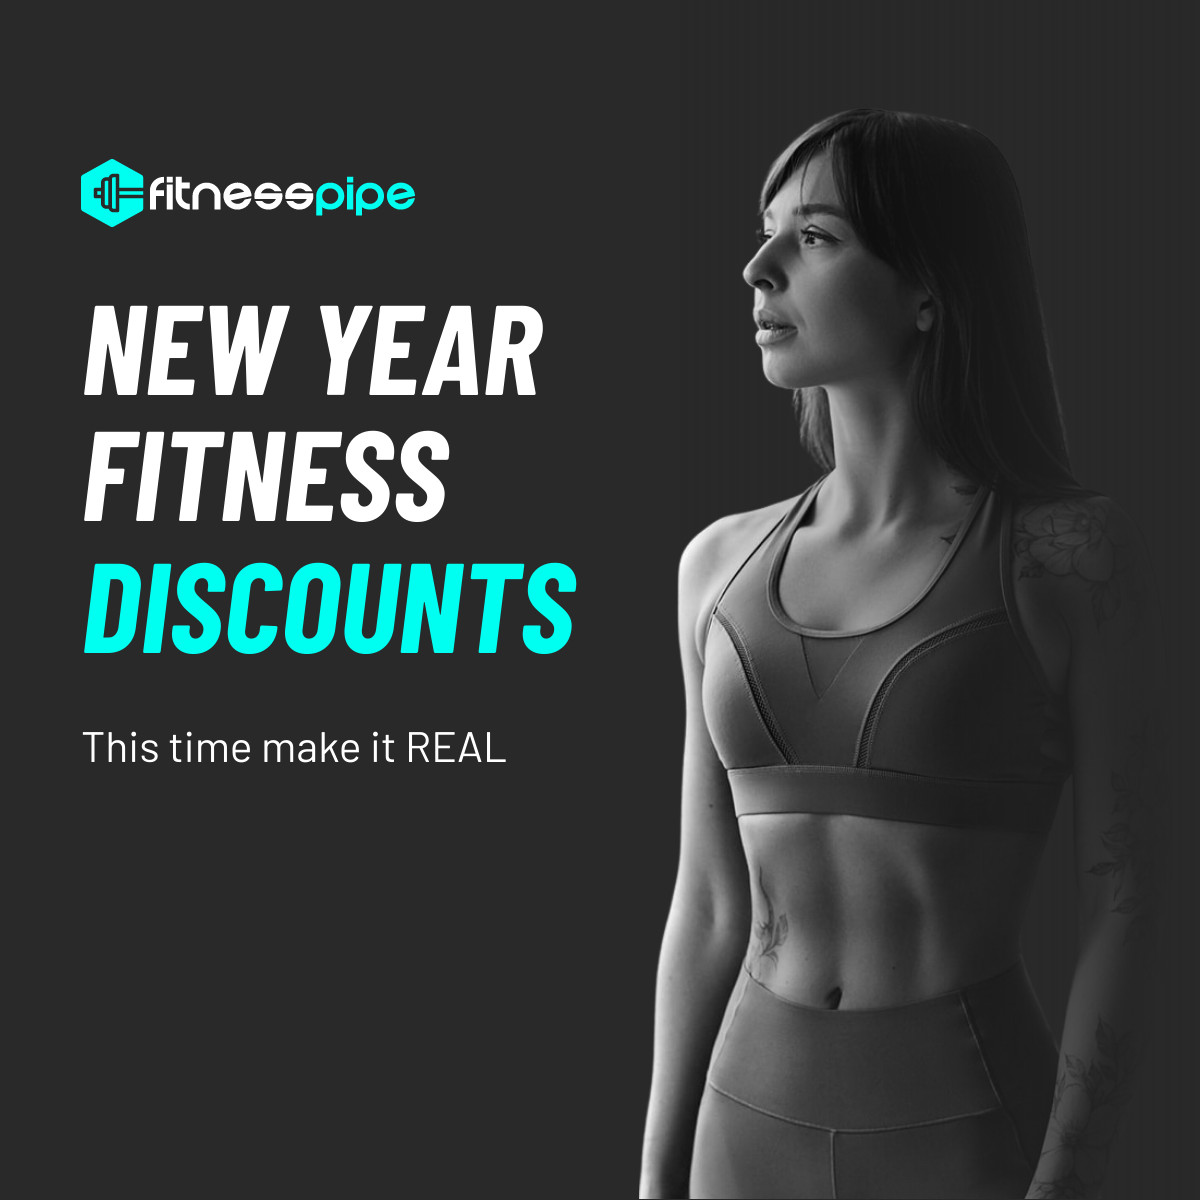 New Year Fitness Real Discounts Inline Rectangle 300x250